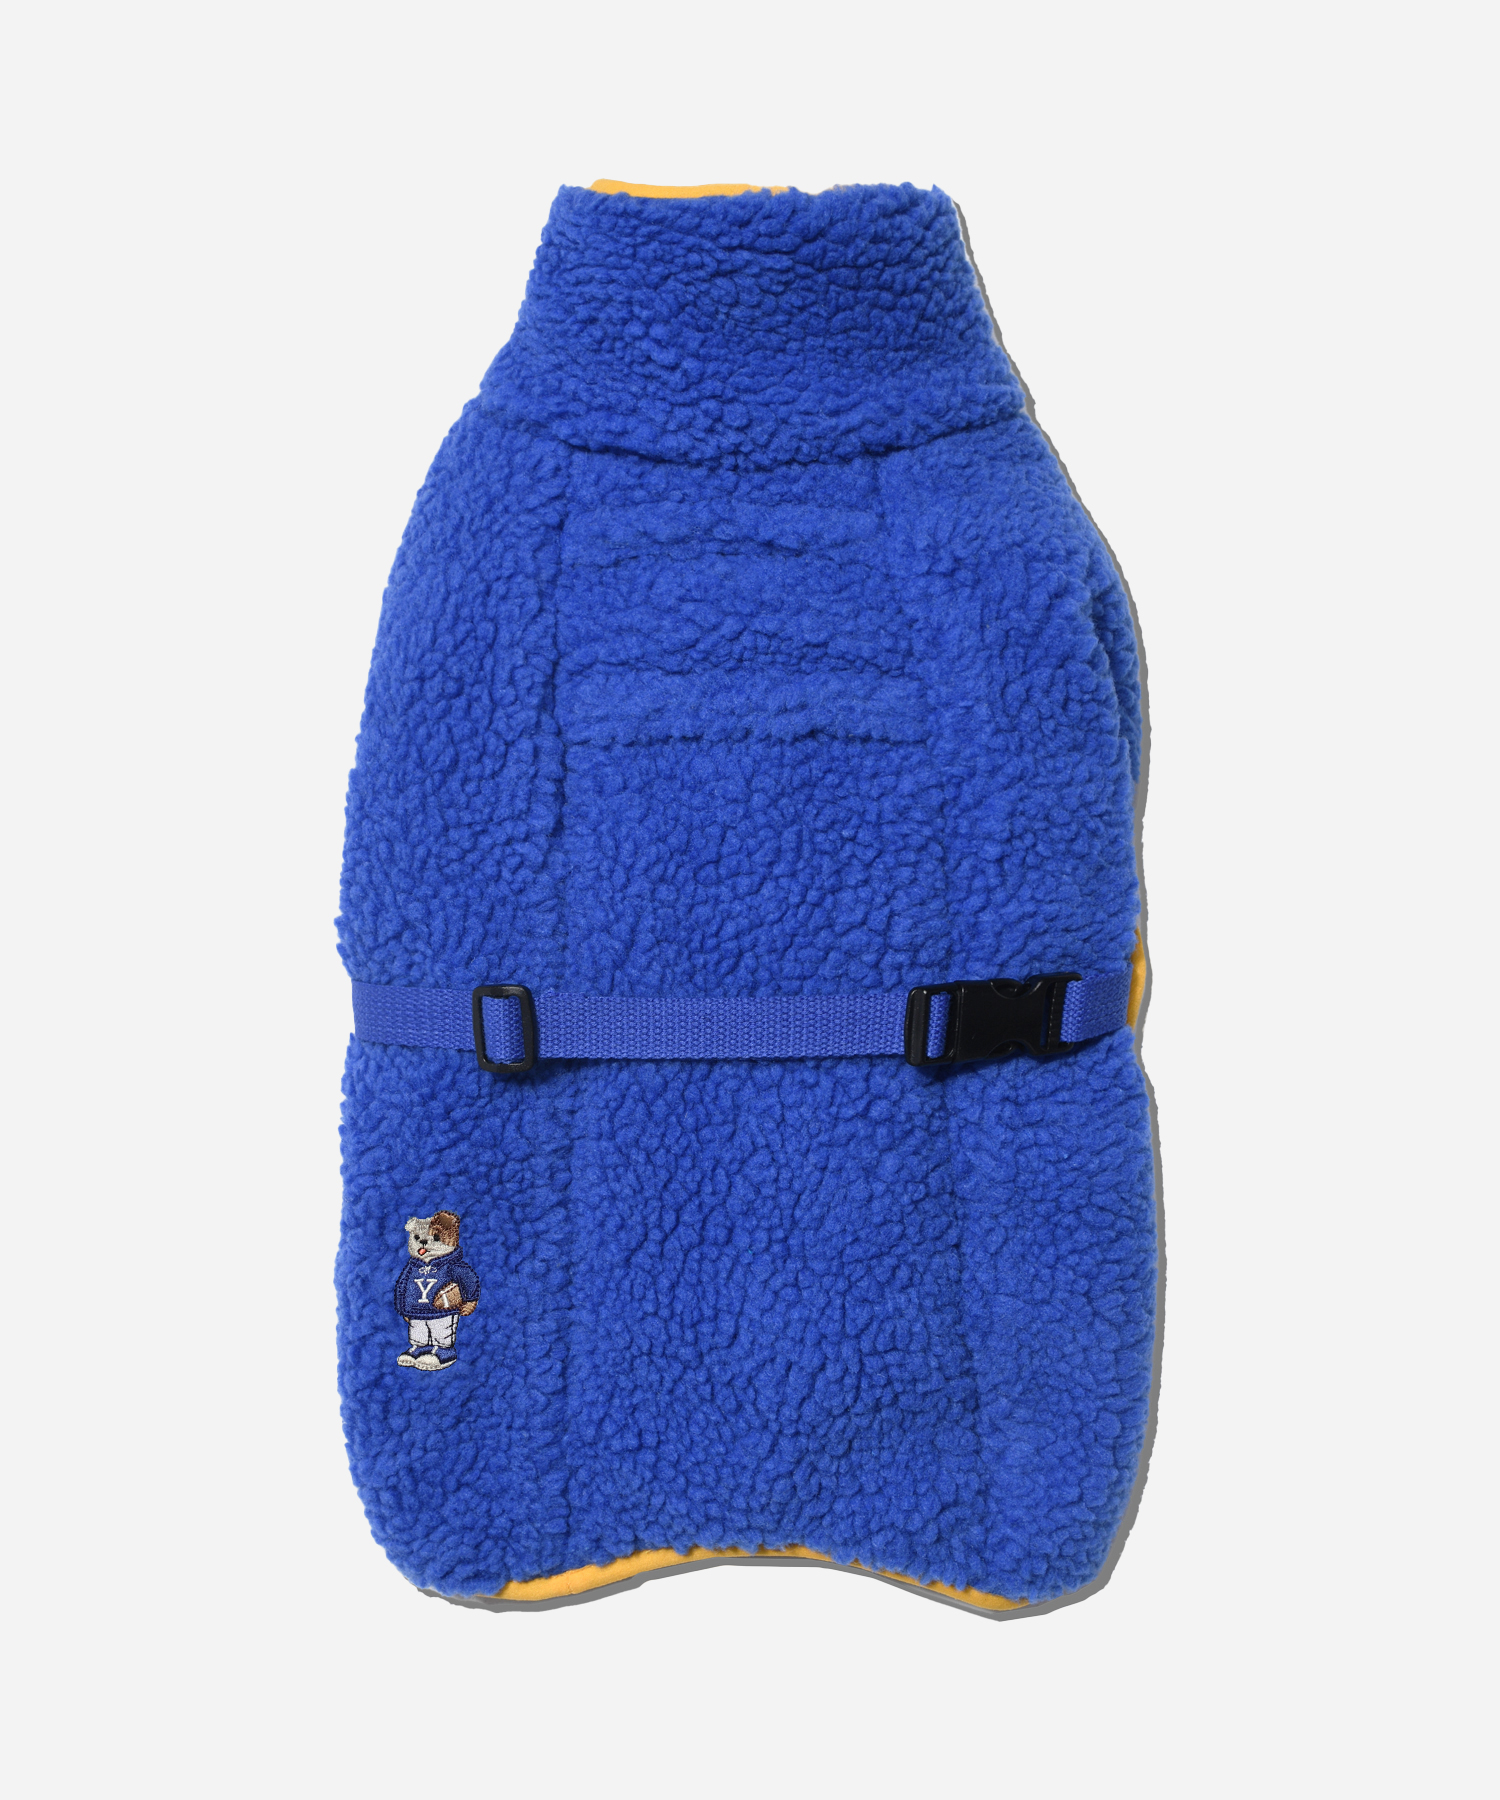 EMBROIDERY DAN THINSULATE DOGGY PADDING BLUE